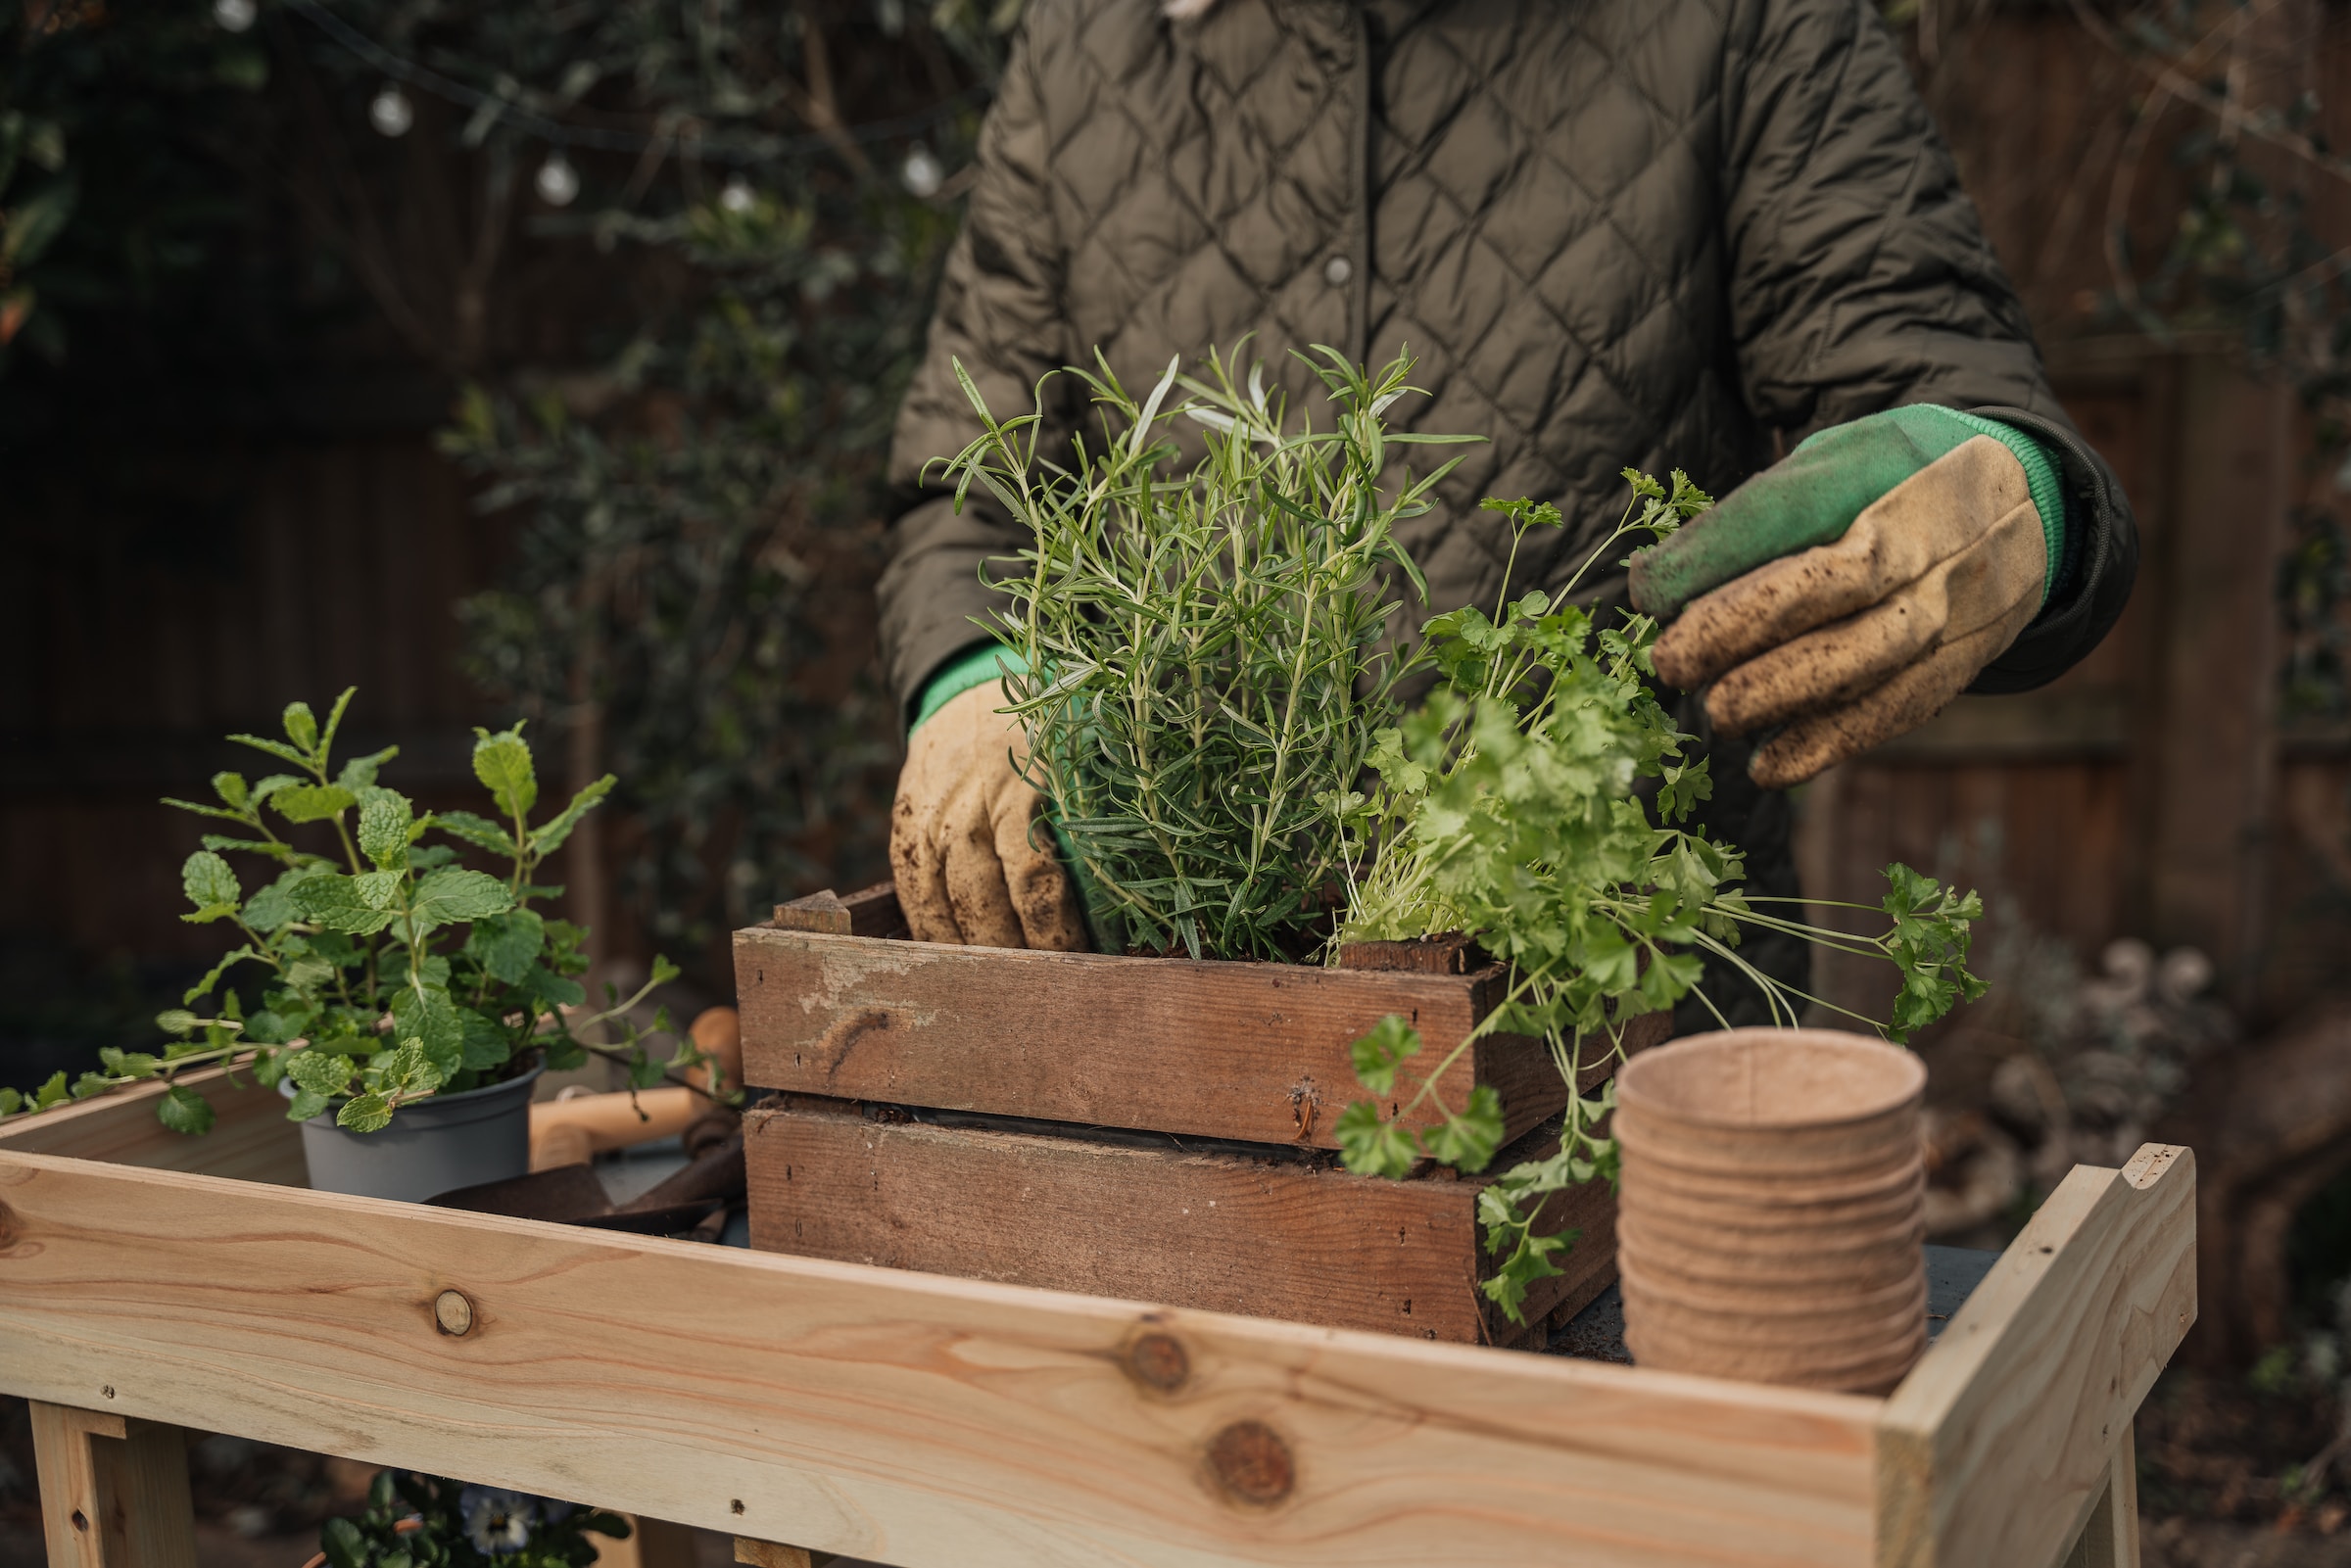 A man is putting plants on a wooden tray to grow his green thumb.